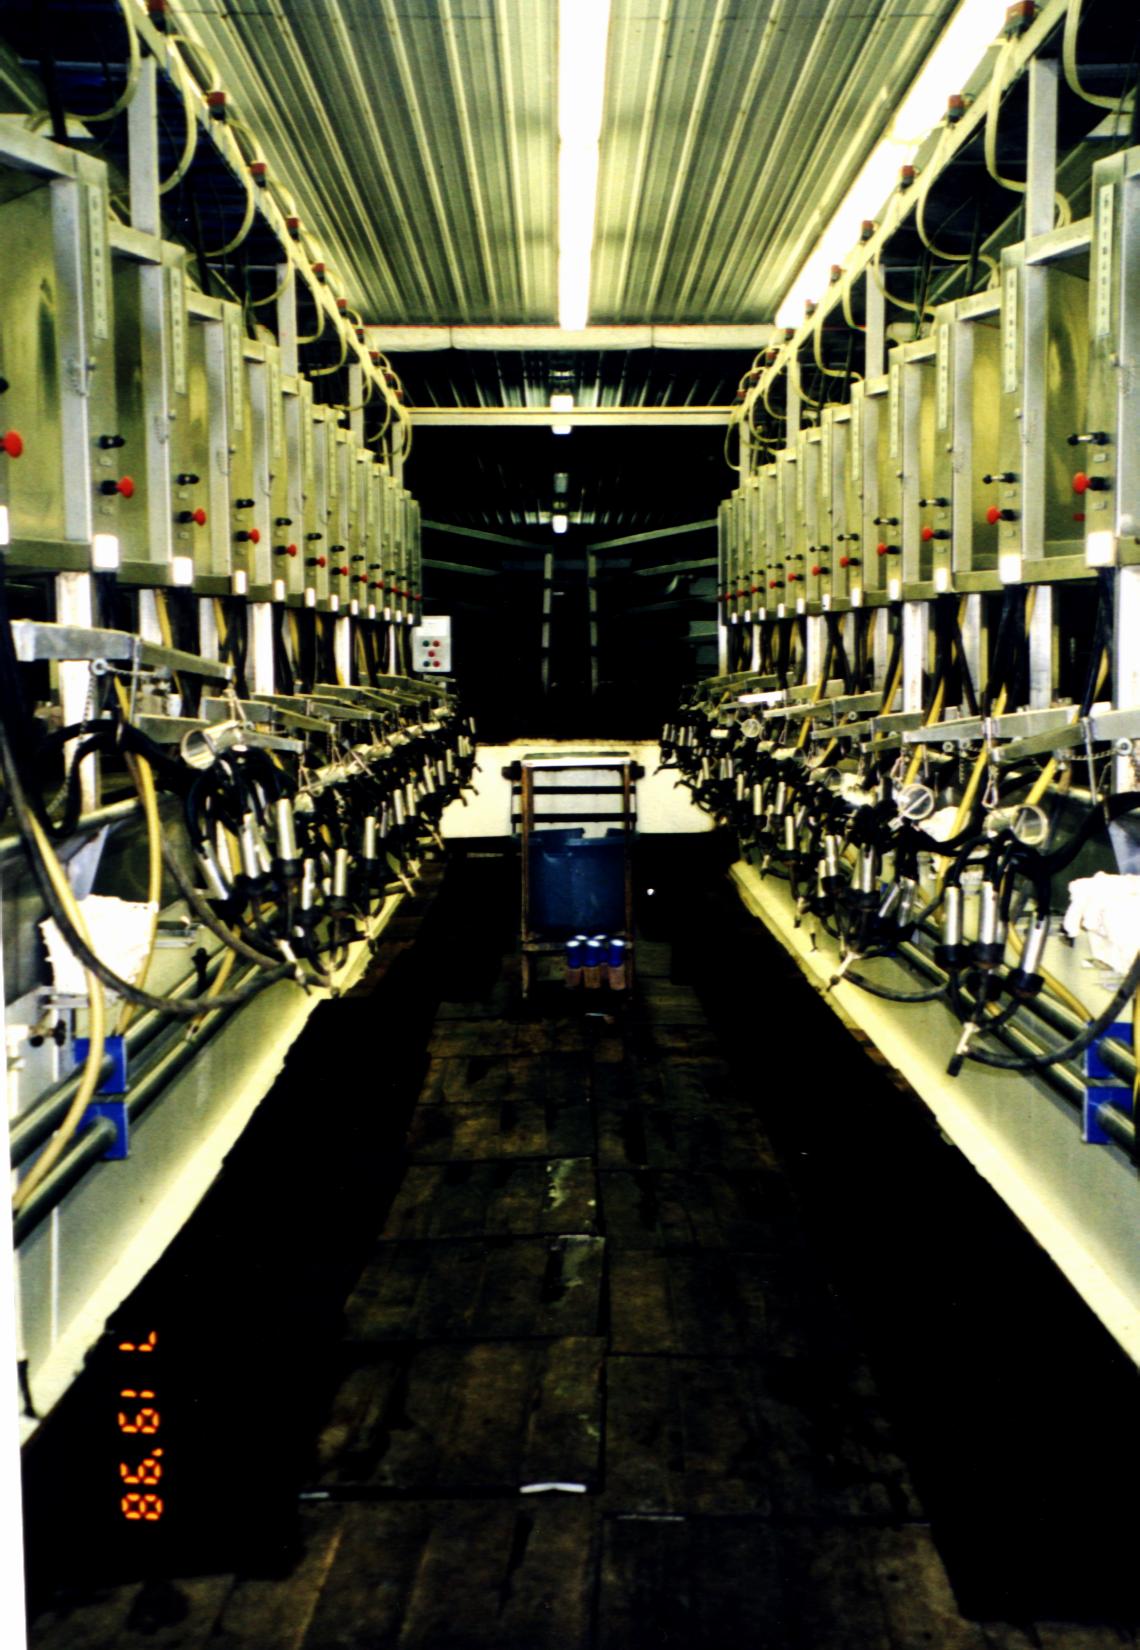 A view from the front of the milking
parlor.